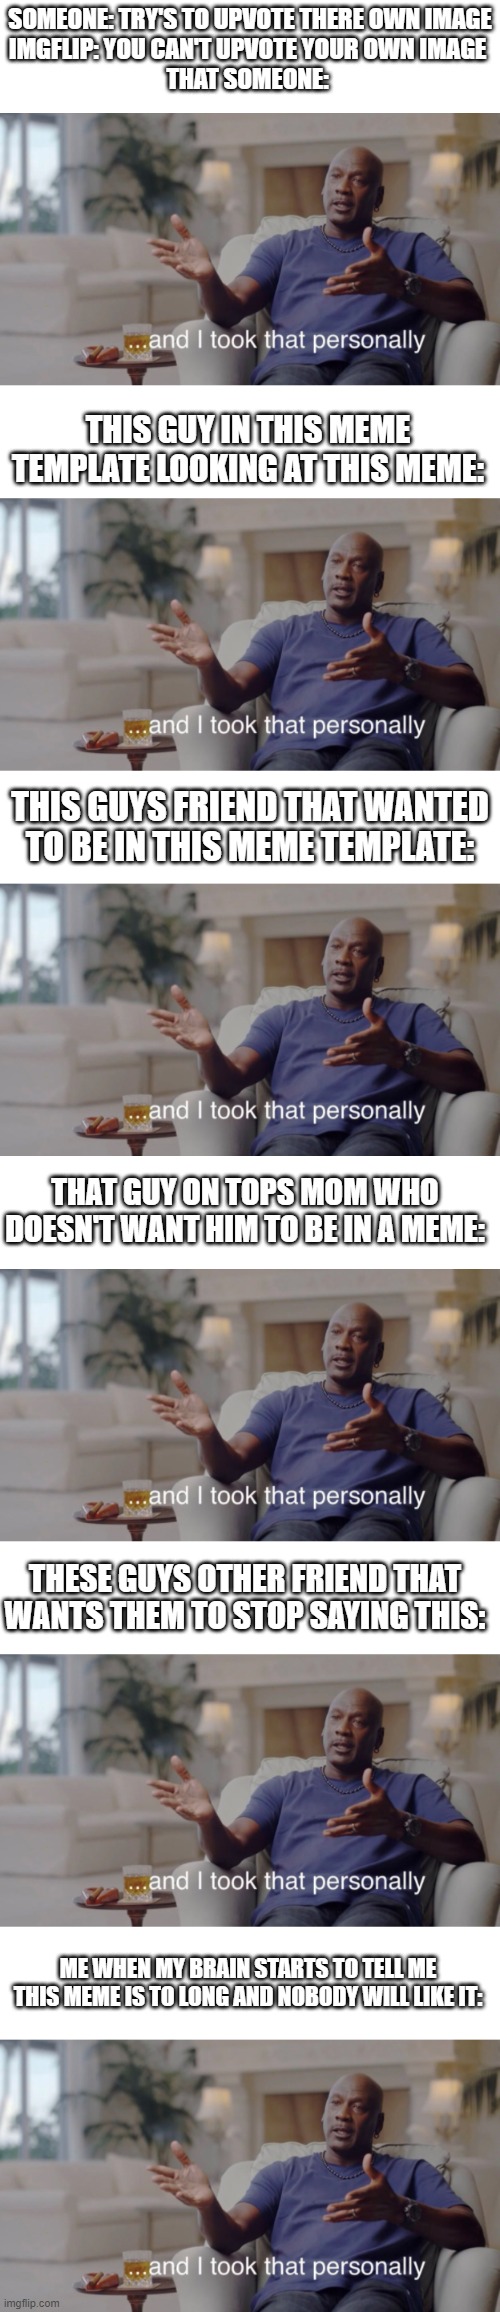 this is the longest meme i made | SOMEONE: TRY'S TO UPVOTE THERE OWN IMAGE
IMGFLIP: YOU CAN'T UPVOTE YOUR OWN IMAGE 
THAT SOMEONE:; THIS GUY IN THIS MEME TEMPLATE LOOKING AT THIS MEME:; THIS GUYS FRIEND THAT WANTED TO BE IN THIS MEME TEMPLATE:; THAT GUY ON TOPS MOM WHO DOESN'T WANT HIM TO BE IN A MEME:; THESE GUYS OTHER FRIEND THAT WANTS THEM TO STOP SAYING THIS:; ME WHEN MY BRAIN STARTS TO TELL ME THIS MEME IS TO LONG AND NOBODY WILL LIKE IT: | image tagged in memes,funny,and i took that personally,long meme | made w/ Imgflip meme maker